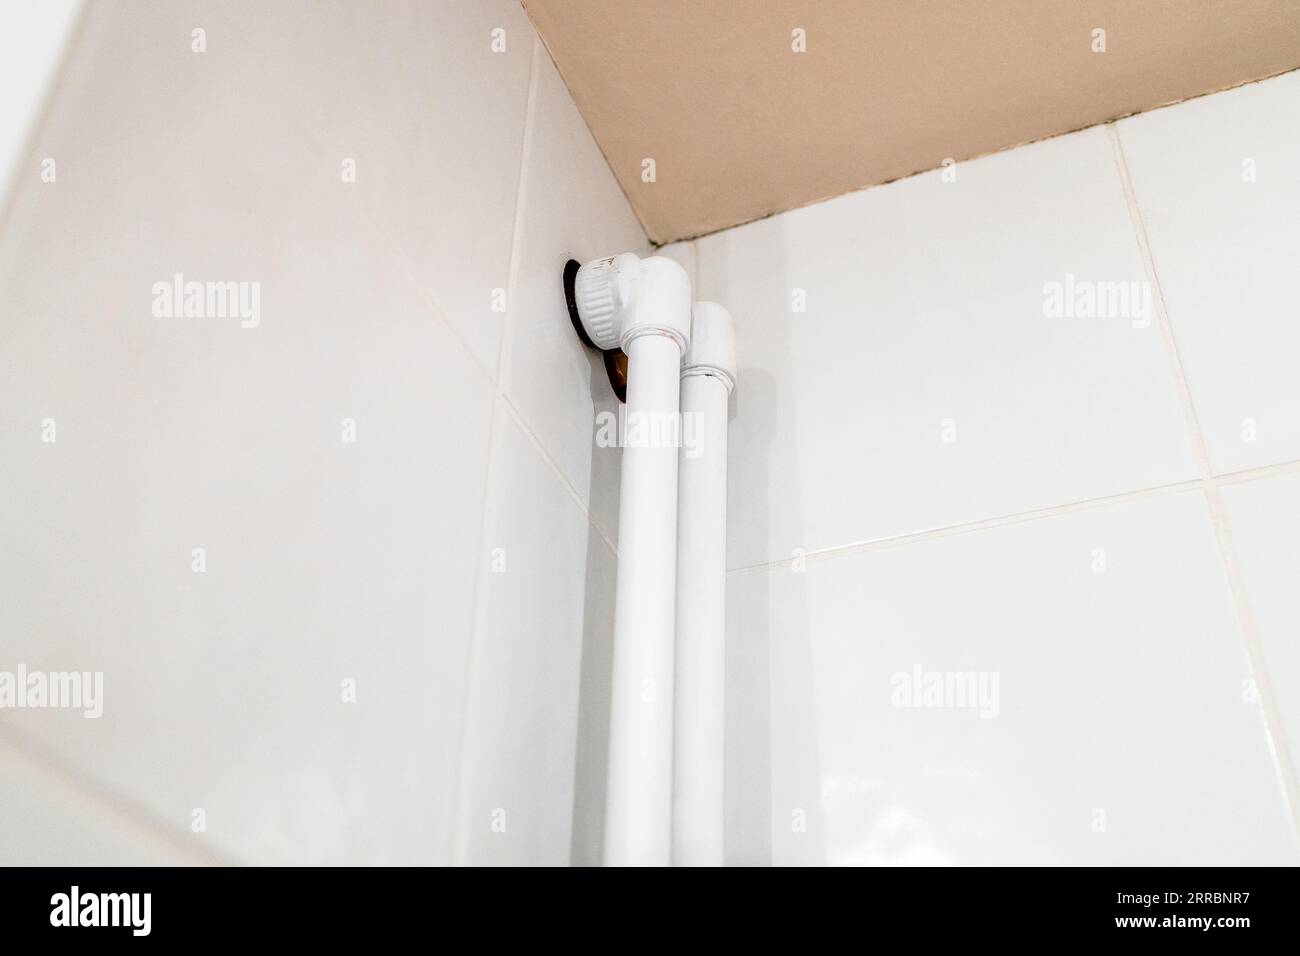 entry of polypropylene pipes at ceiling of bathroom on wall covered with ceramic tiles Stock Photo